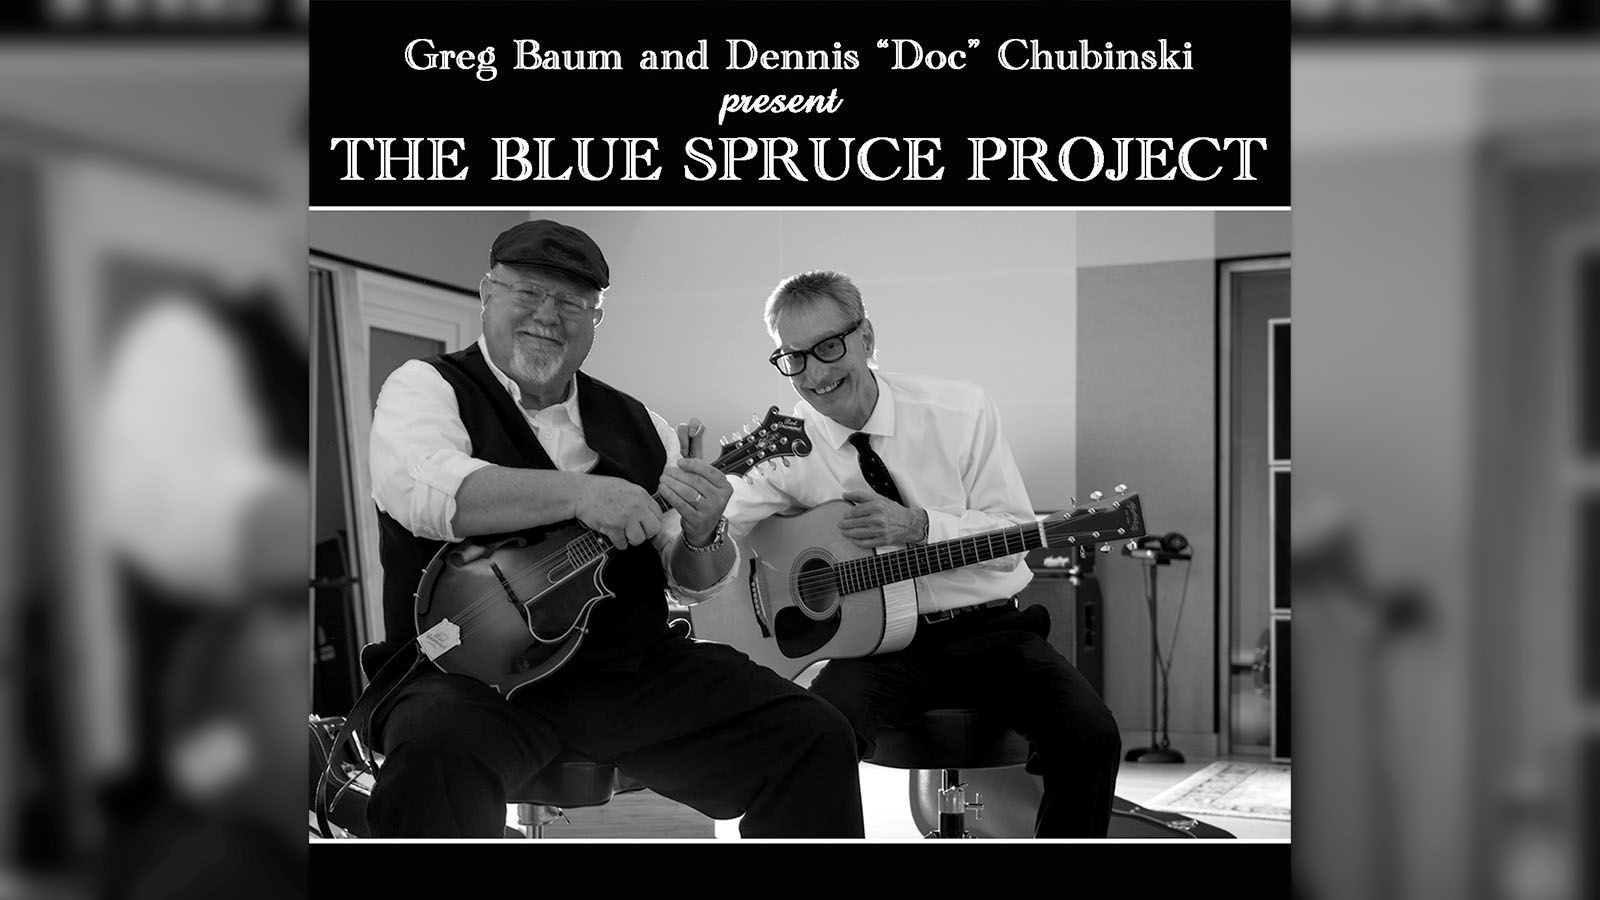 The Blue Spruce Project is a quirky, fun listen.